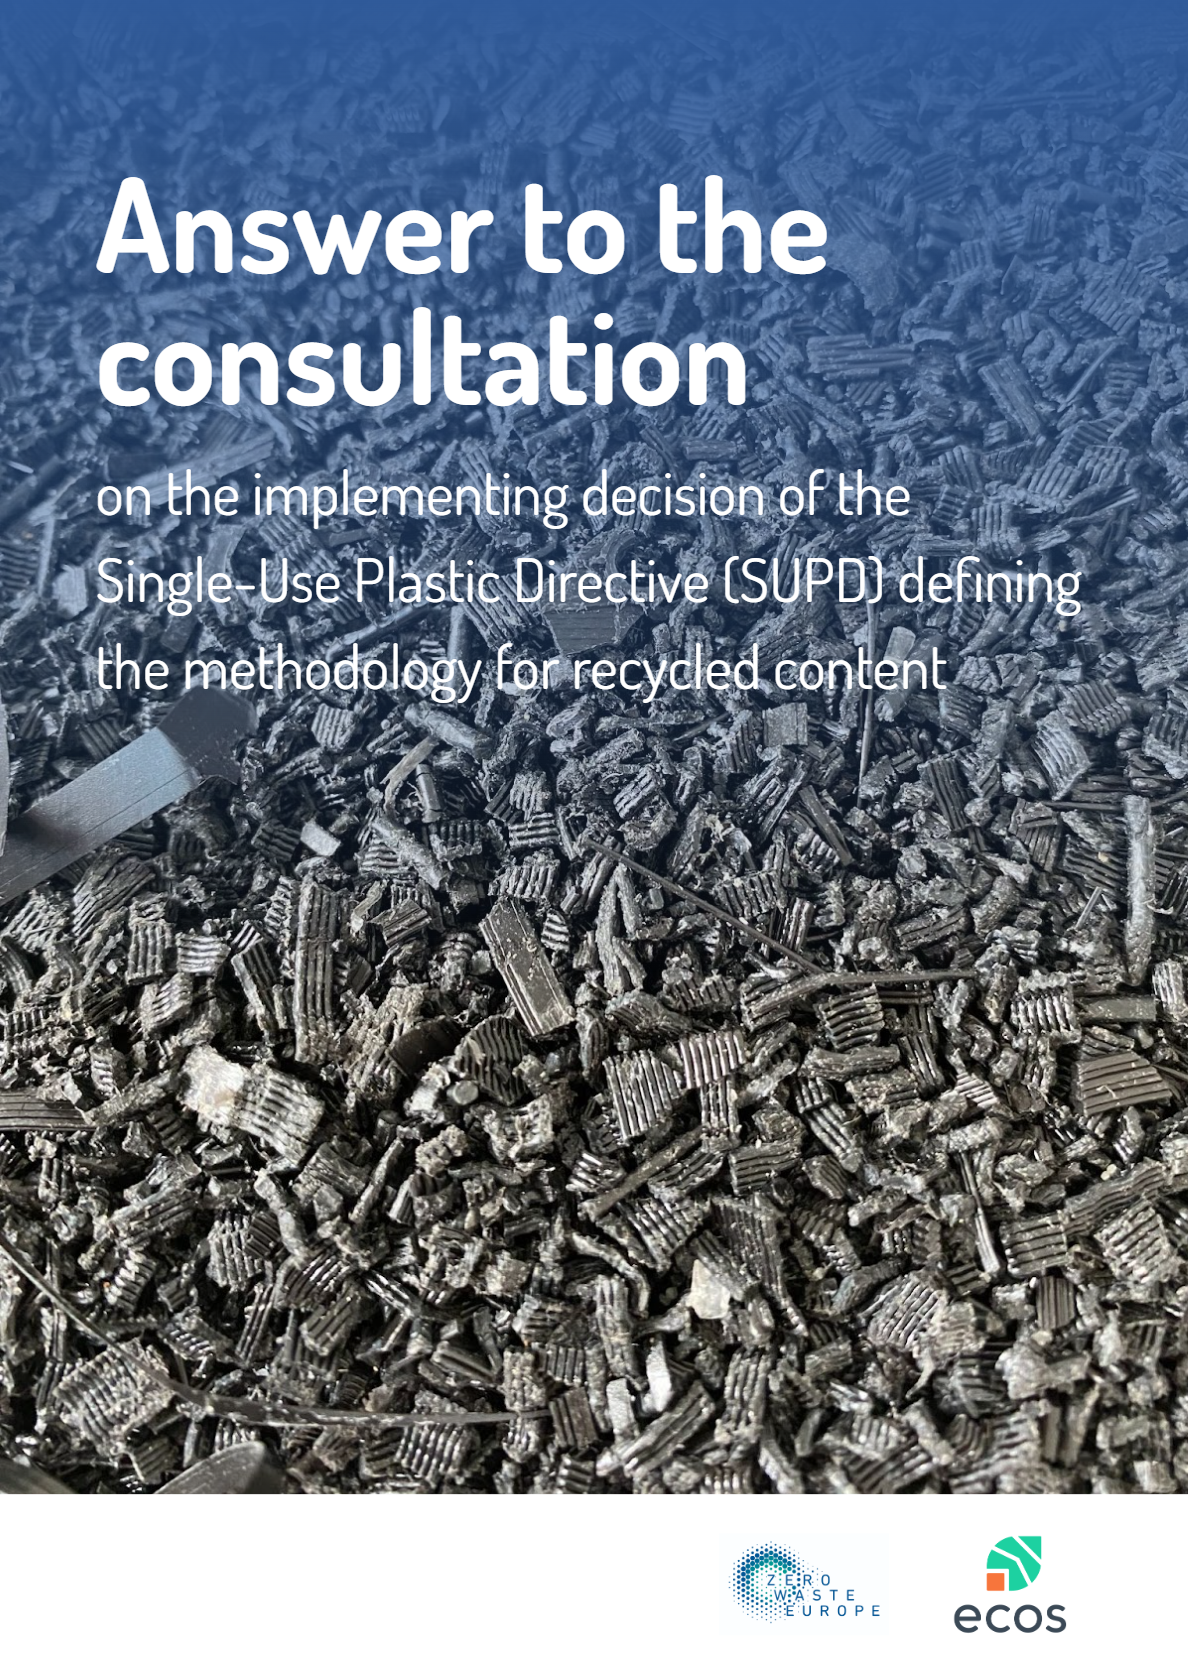 Answer to the consultation on the implementing decision of the Single-Use Plastic Directive (SUPD) defining the methodology for recycled content